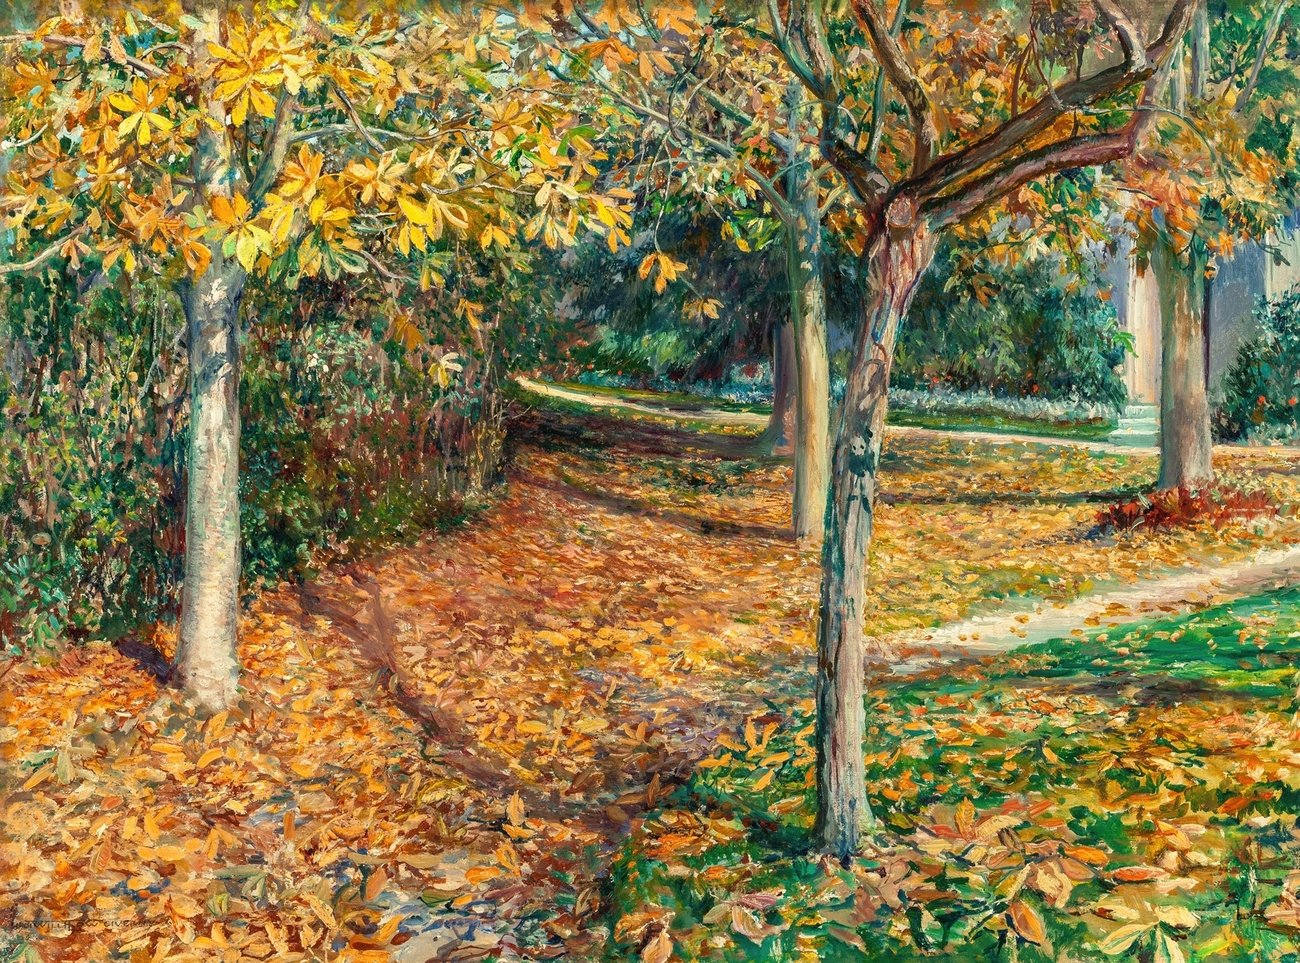 Carpet of Leaves, Giverny (1901)